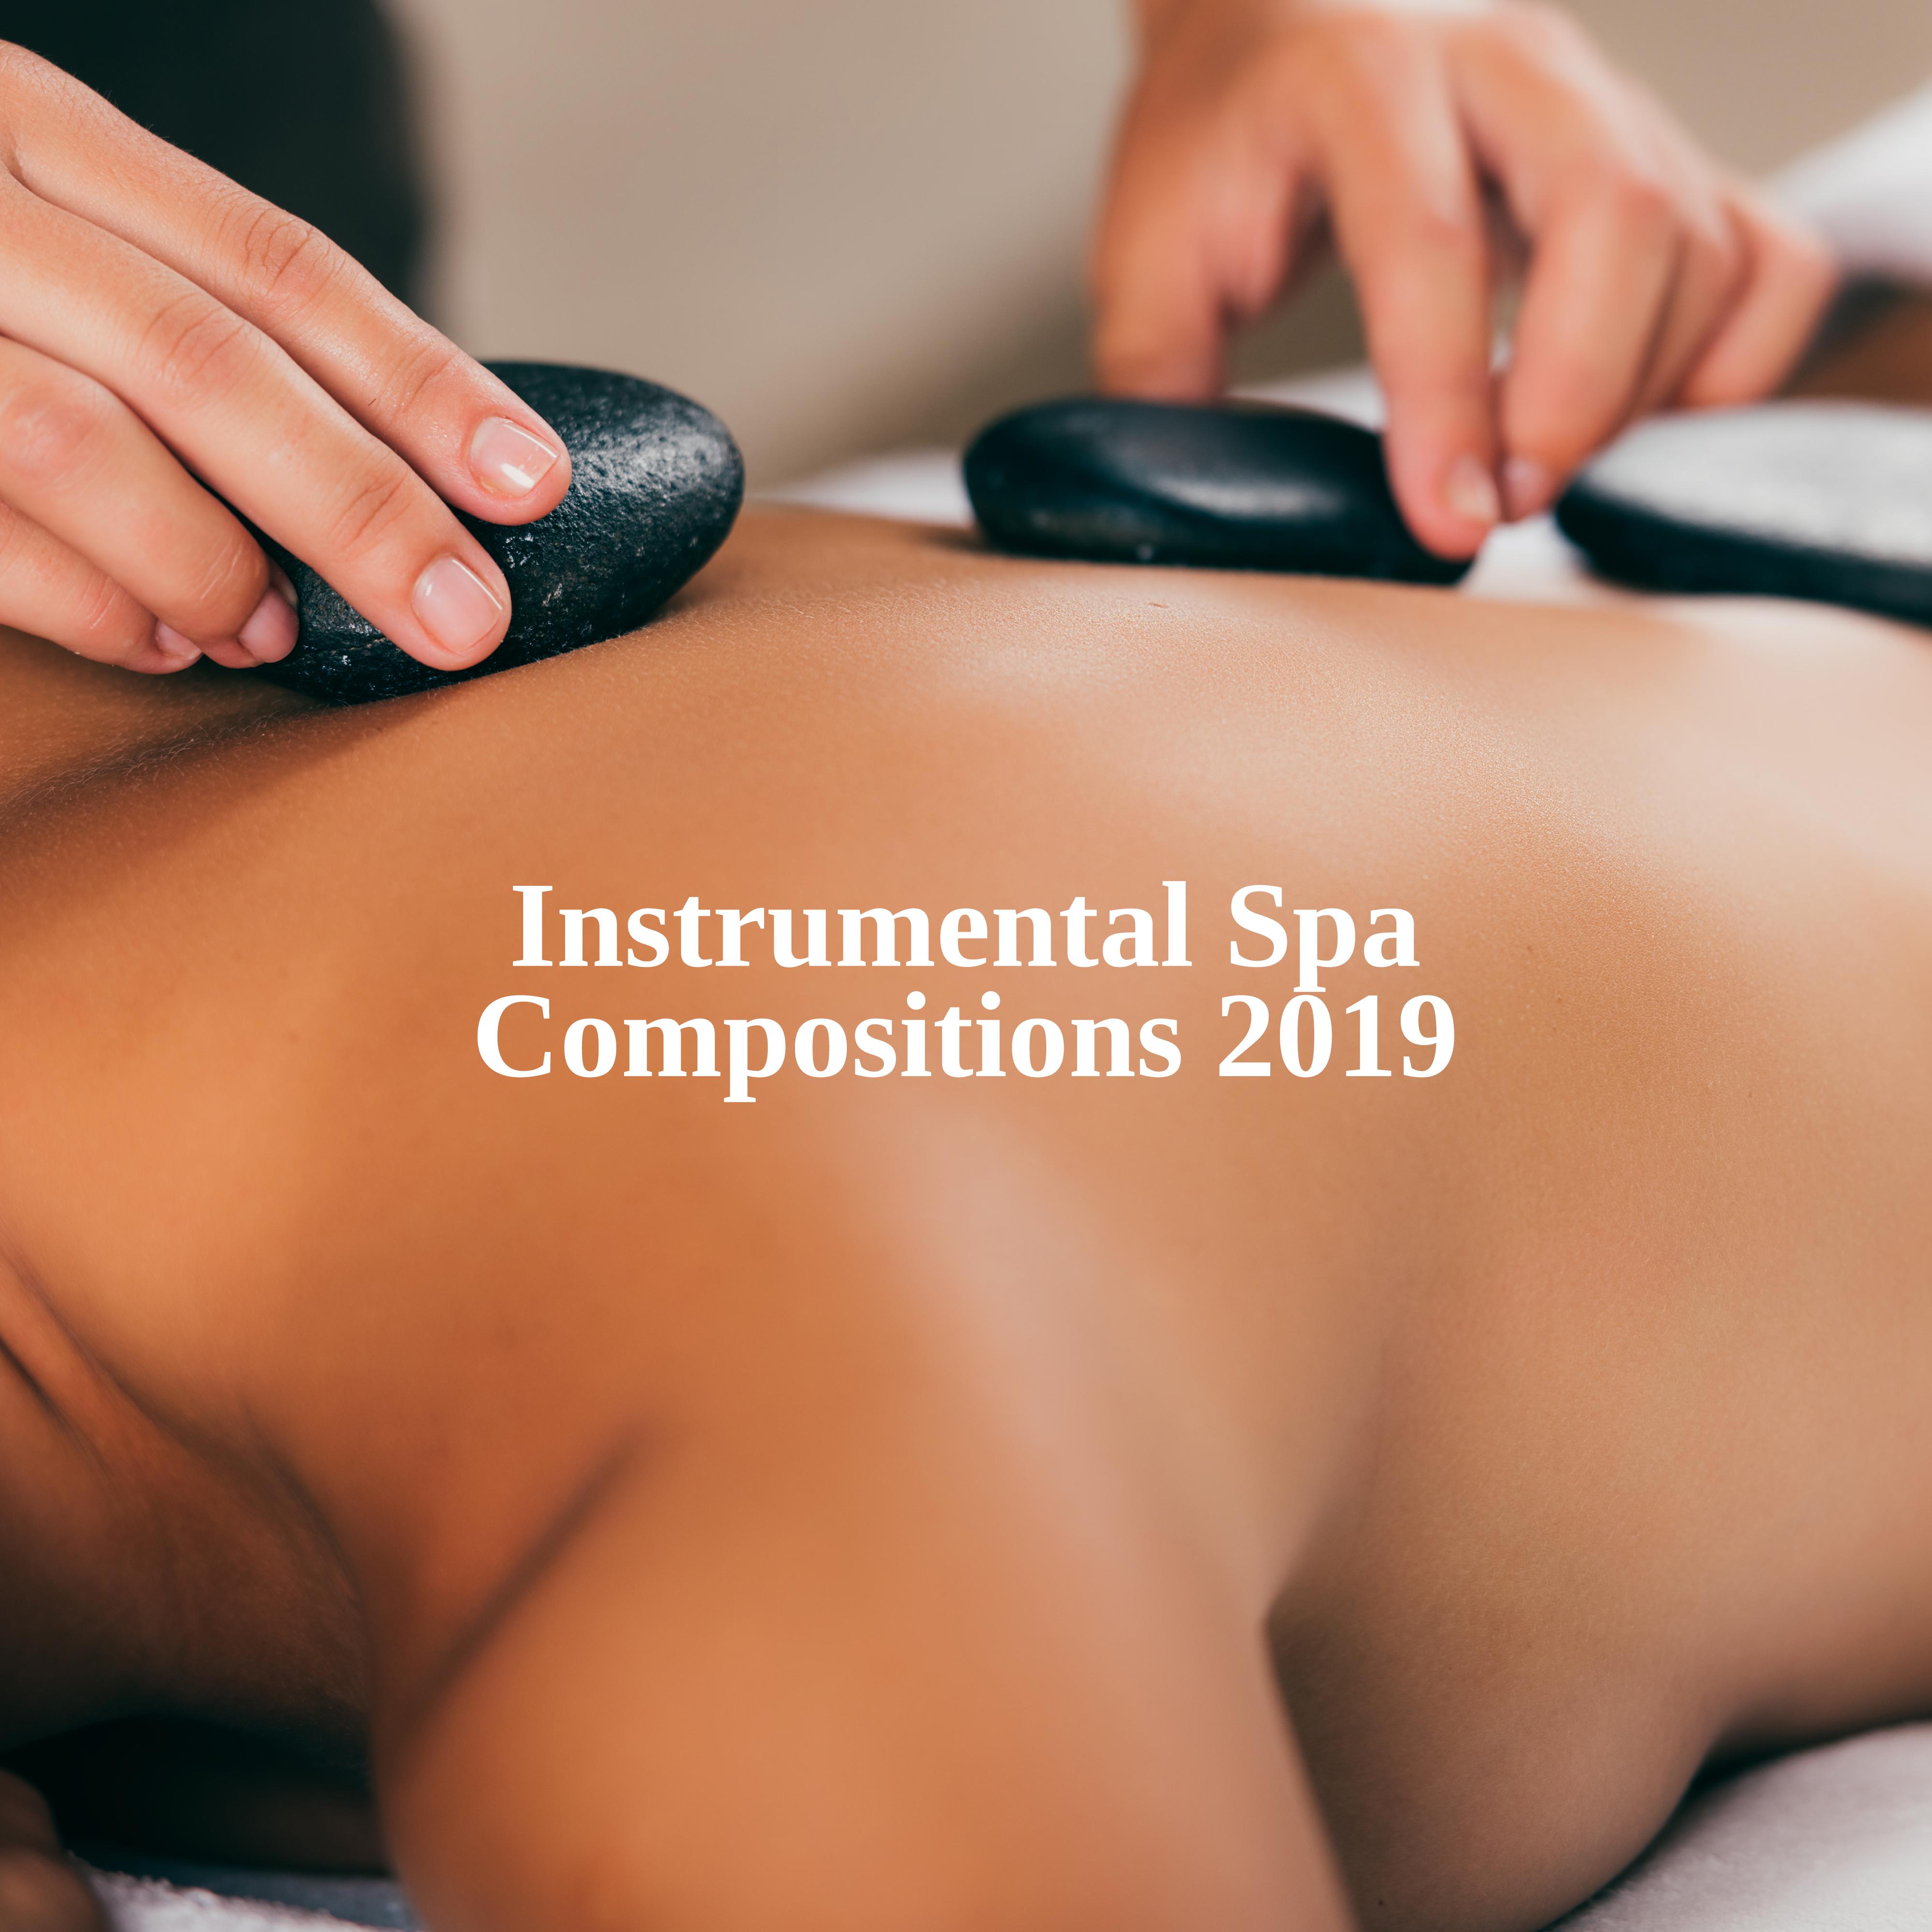 Instrumental Spa Compositions 2019